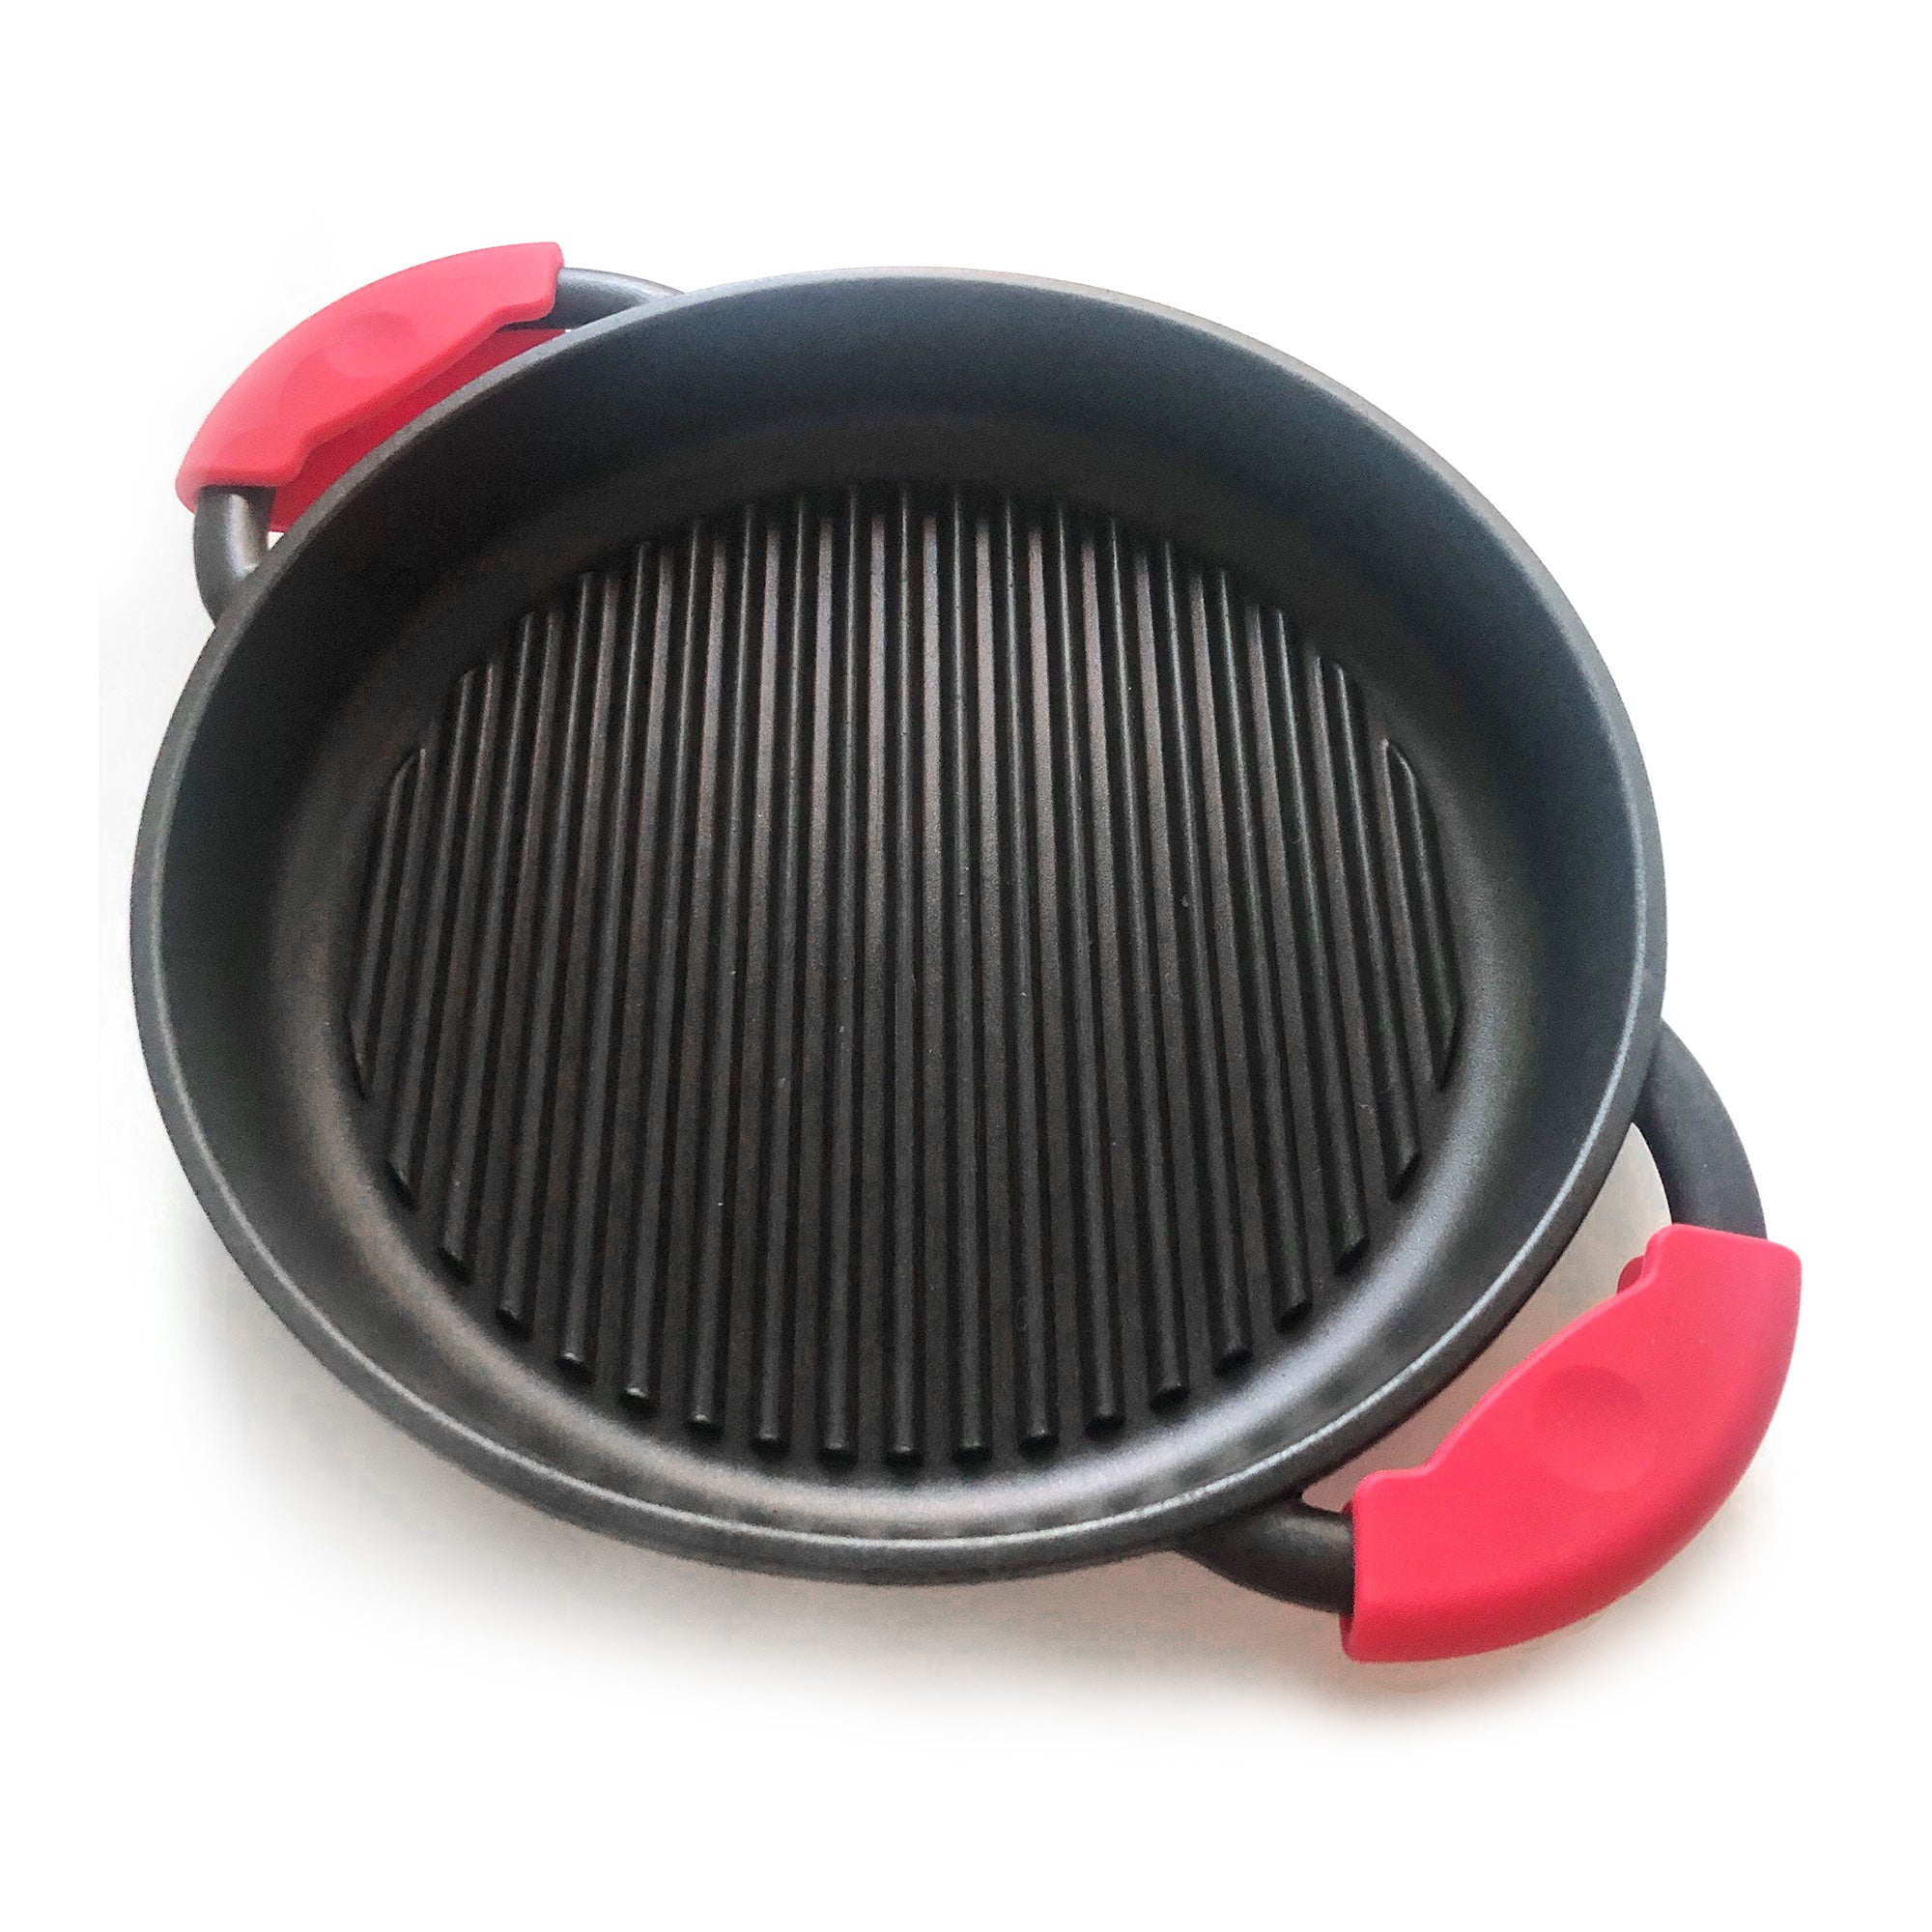 Silicone Handles for The Whatever Pan